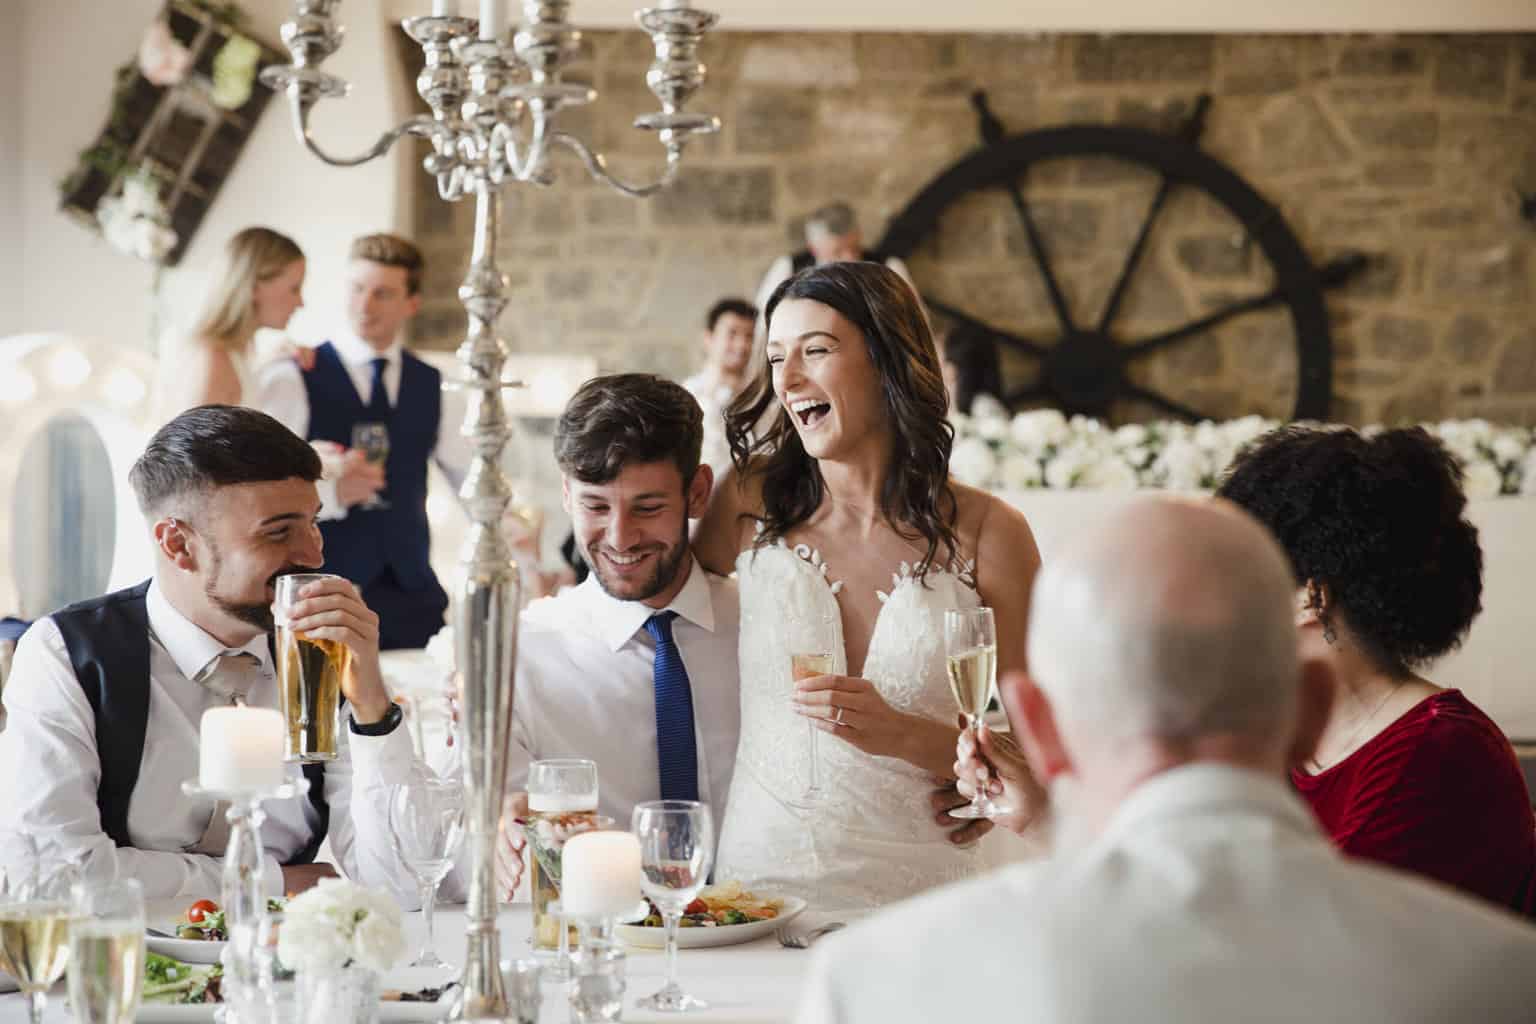 How Many People Should You Invite to The Wedding? 15